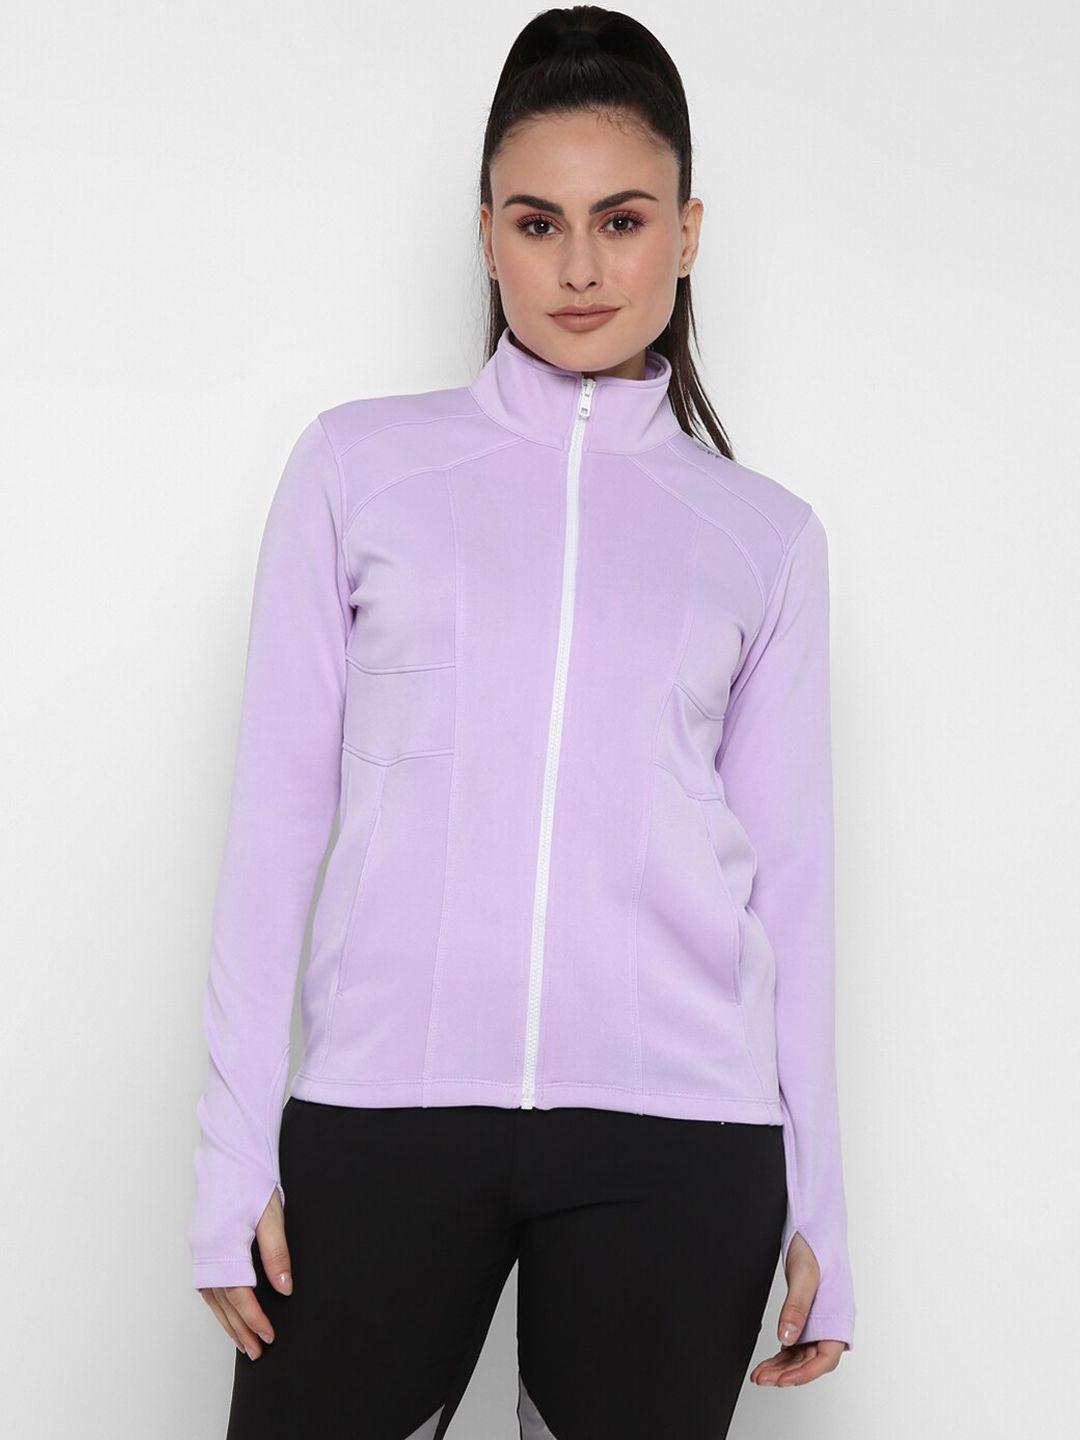 off-limits-women-antimicrobial-tailored-sports-jacket